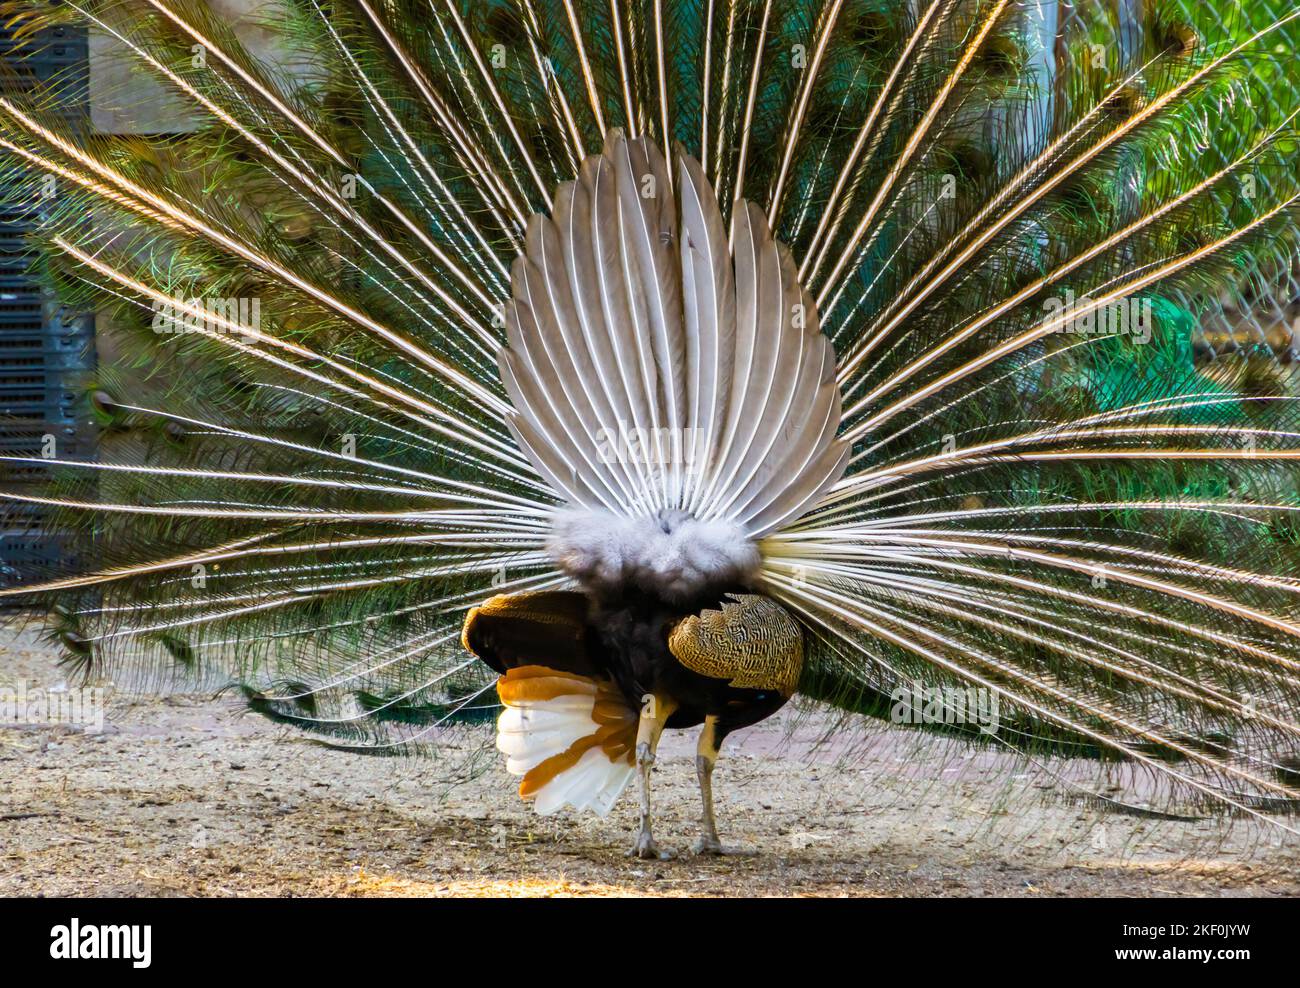 peacock with unfolded feathers rear view, tropical ornamental bird specie from India Stock Photo